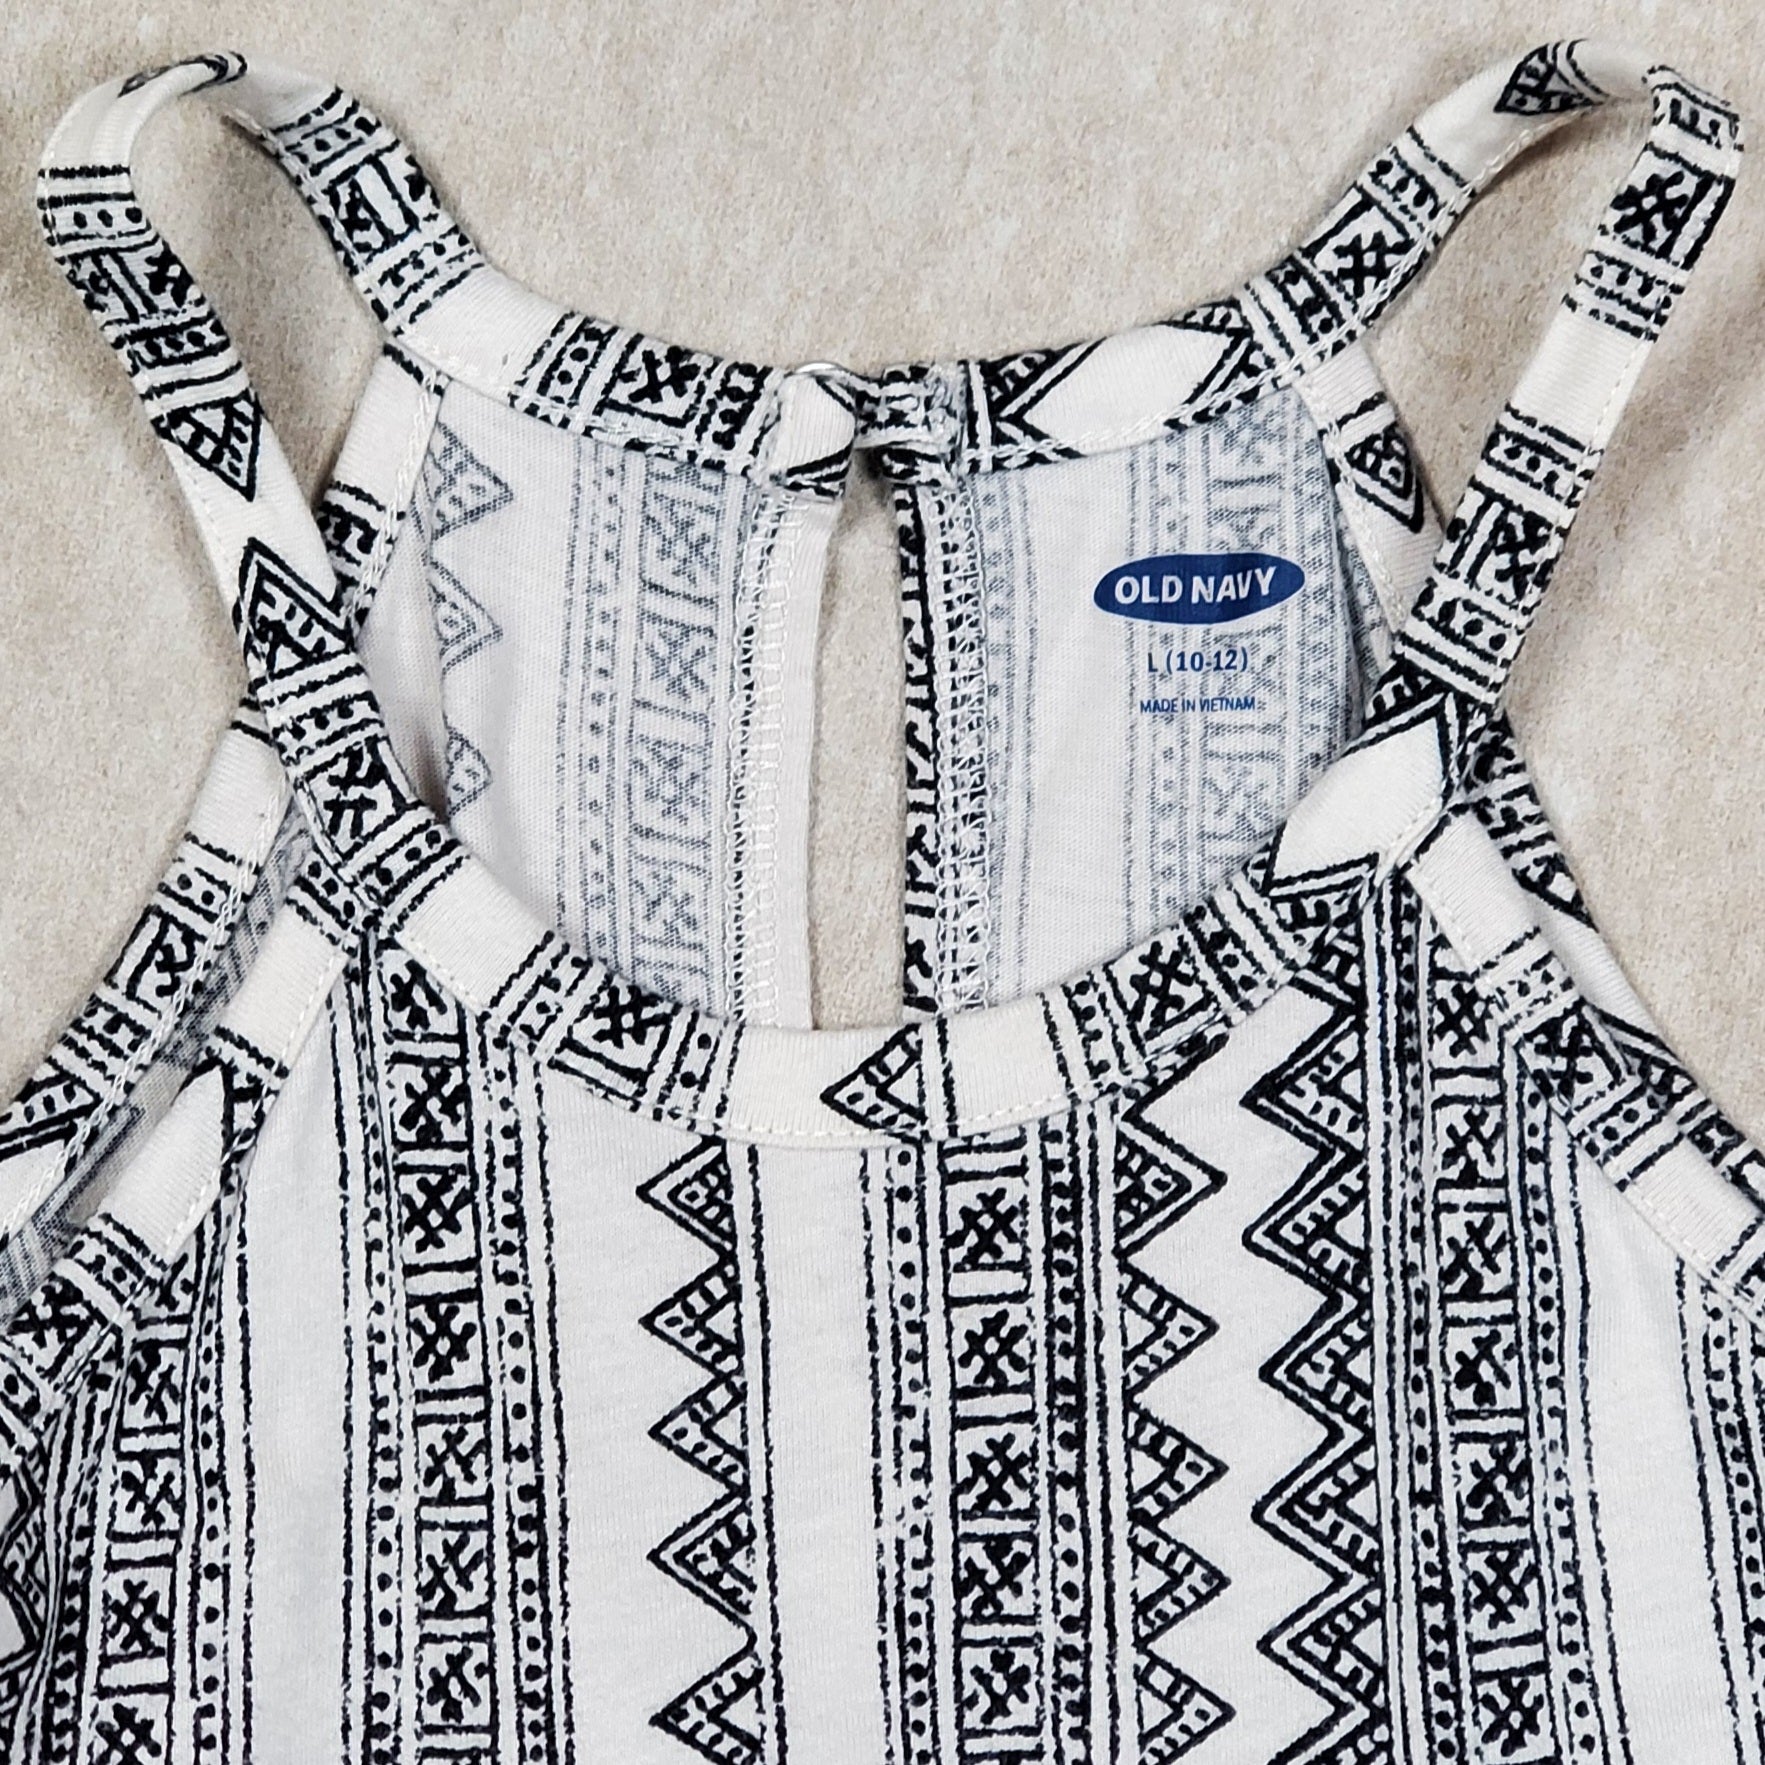 Old Navy Girls Patterned Romper Black White Used, front close-up